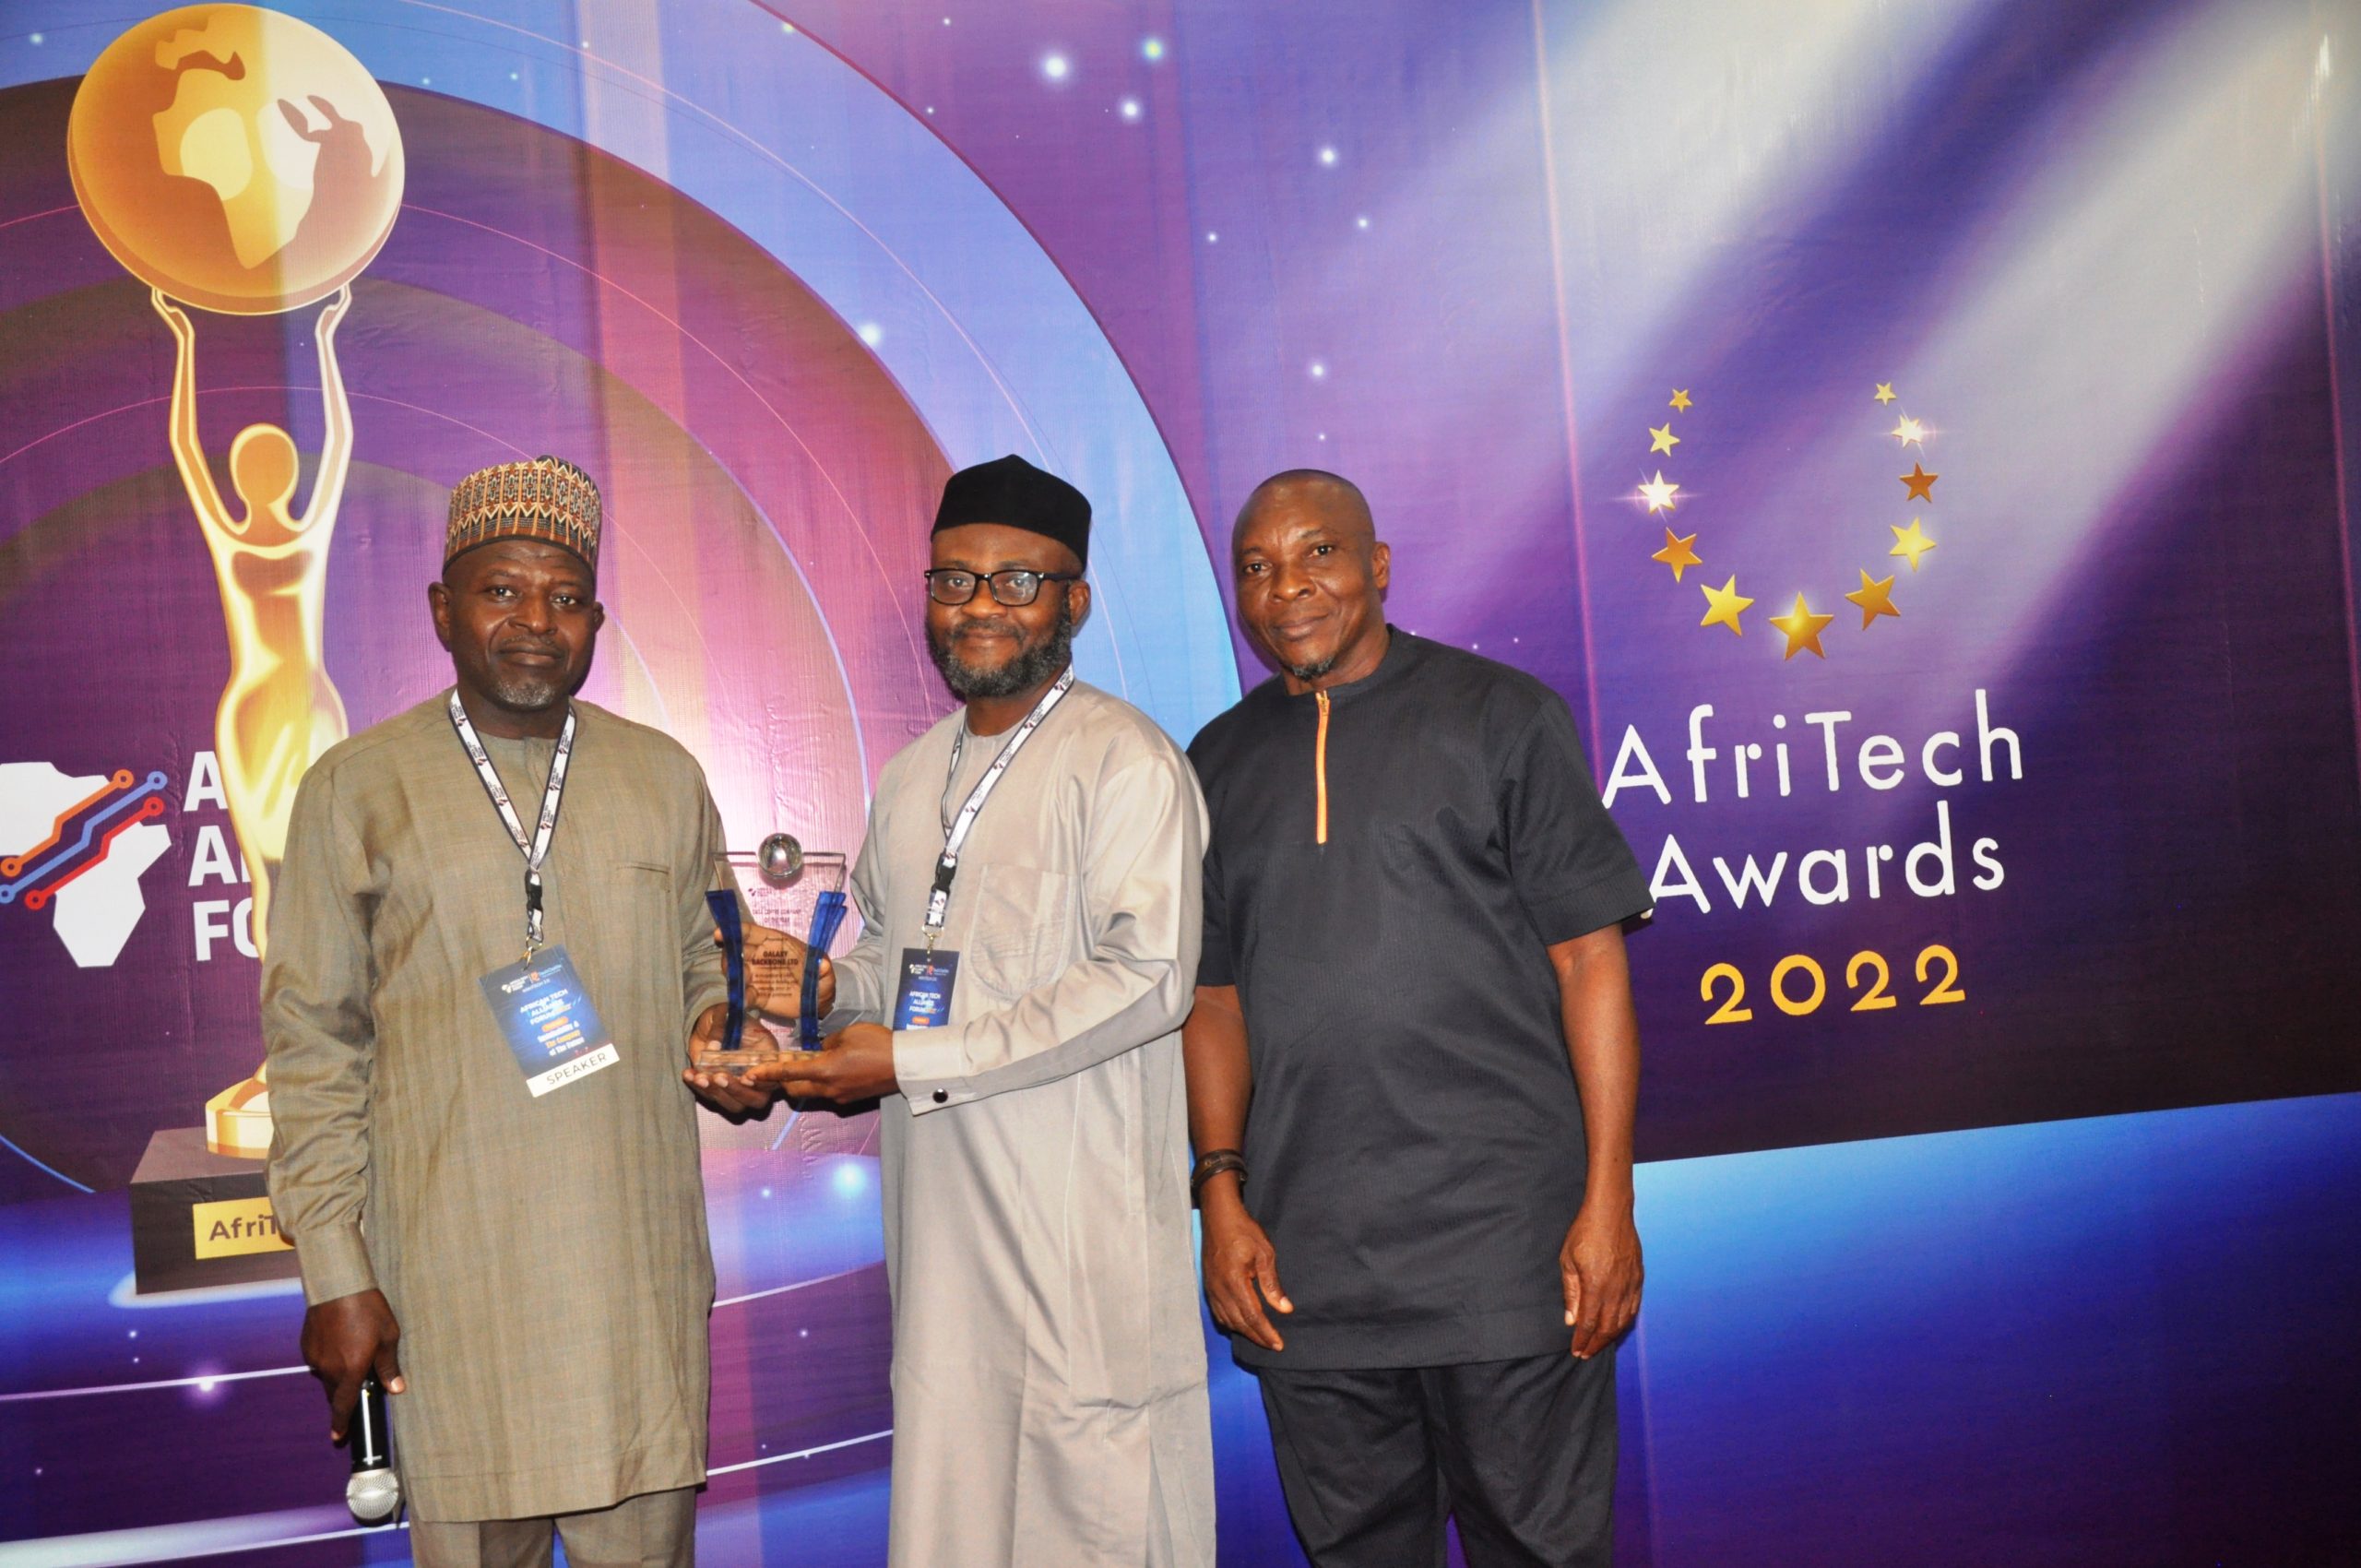 L-r: Prof. Abdu-Ja’afaru Bambale, Executive Director, Technical Services, NIGCOMSAT representing the Minister of Communications and Digital Economy, Prof. Isa Pantami during the presentation of Data Centre Company of the Year Award to Galaxy backbone received by Dauda Oyeleye, Regional Manager, Lagos & South West (GBB) with Chike Onwuegbuchi, Co-Founder, TechCastle Foundation observing.